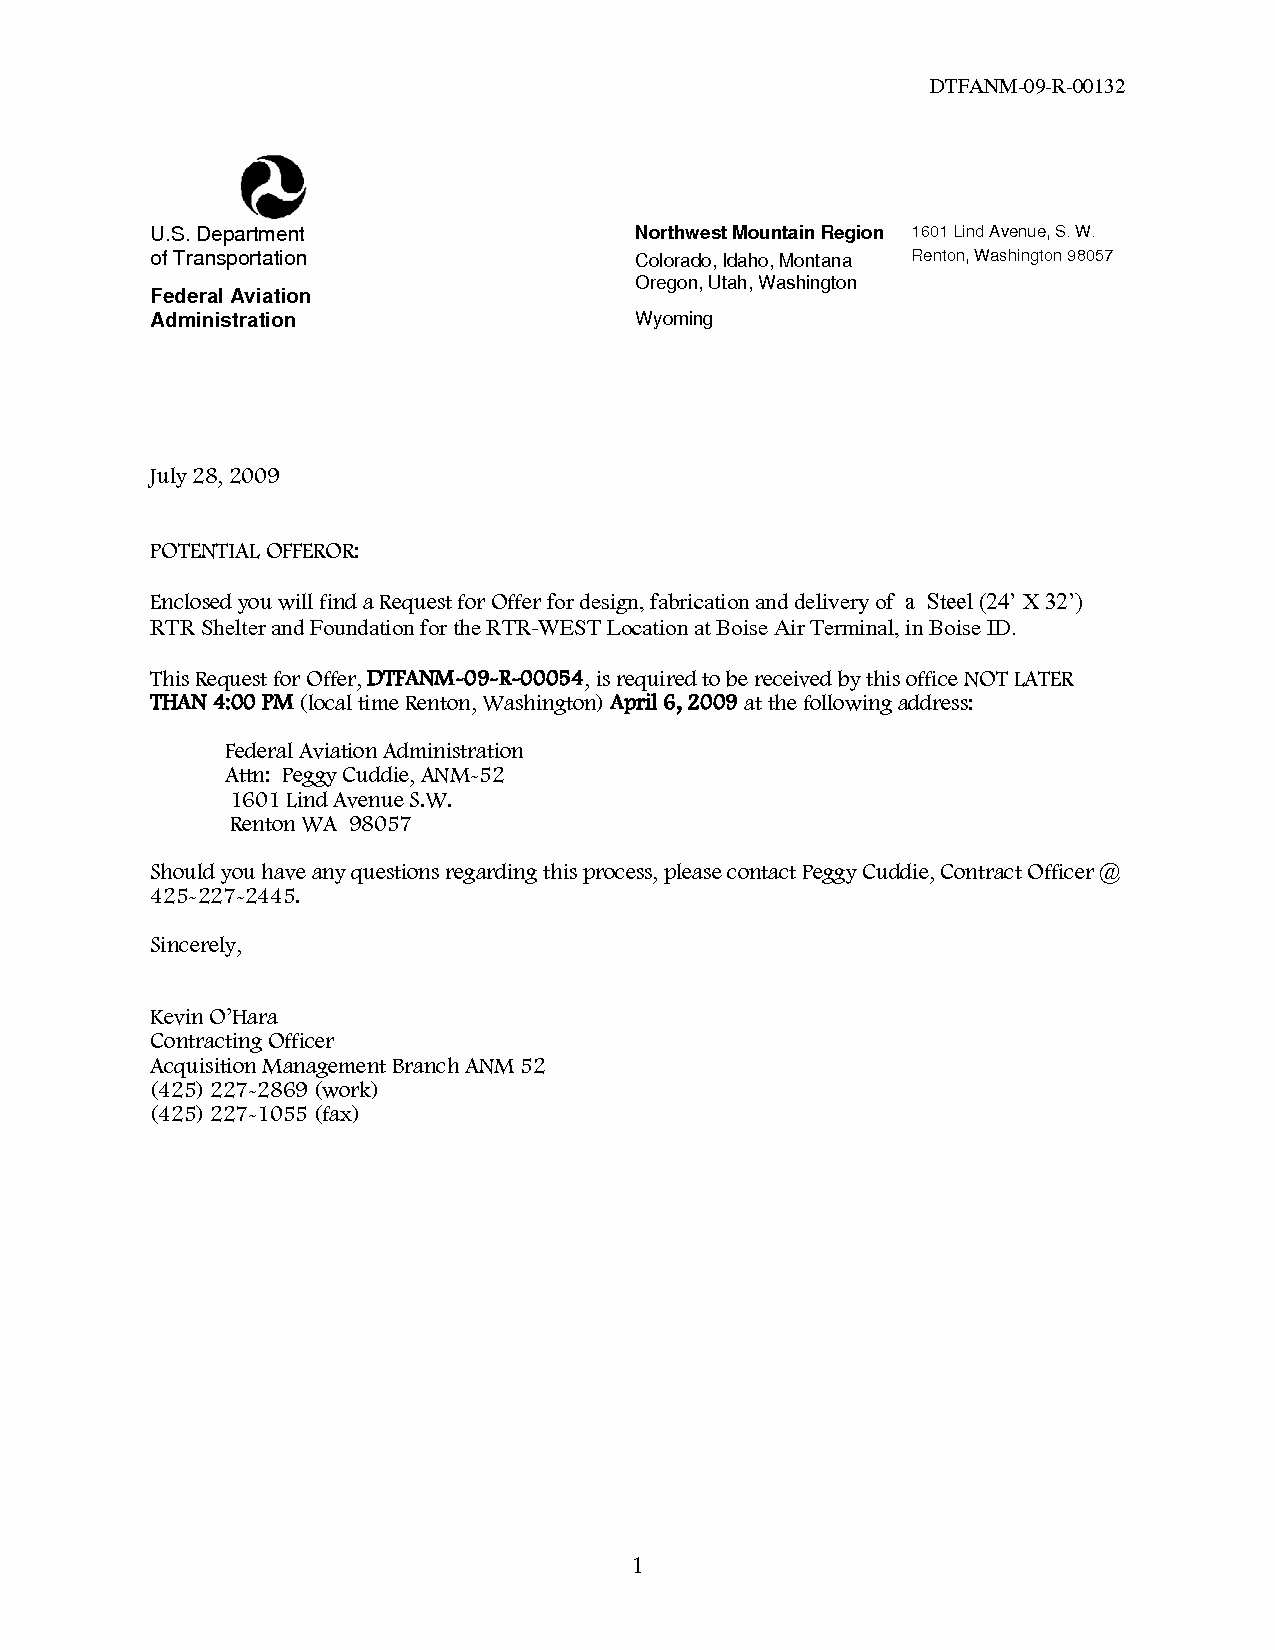 Format Of A Recomendation Letter Beautiful Bank Reference Letter Template Mughals